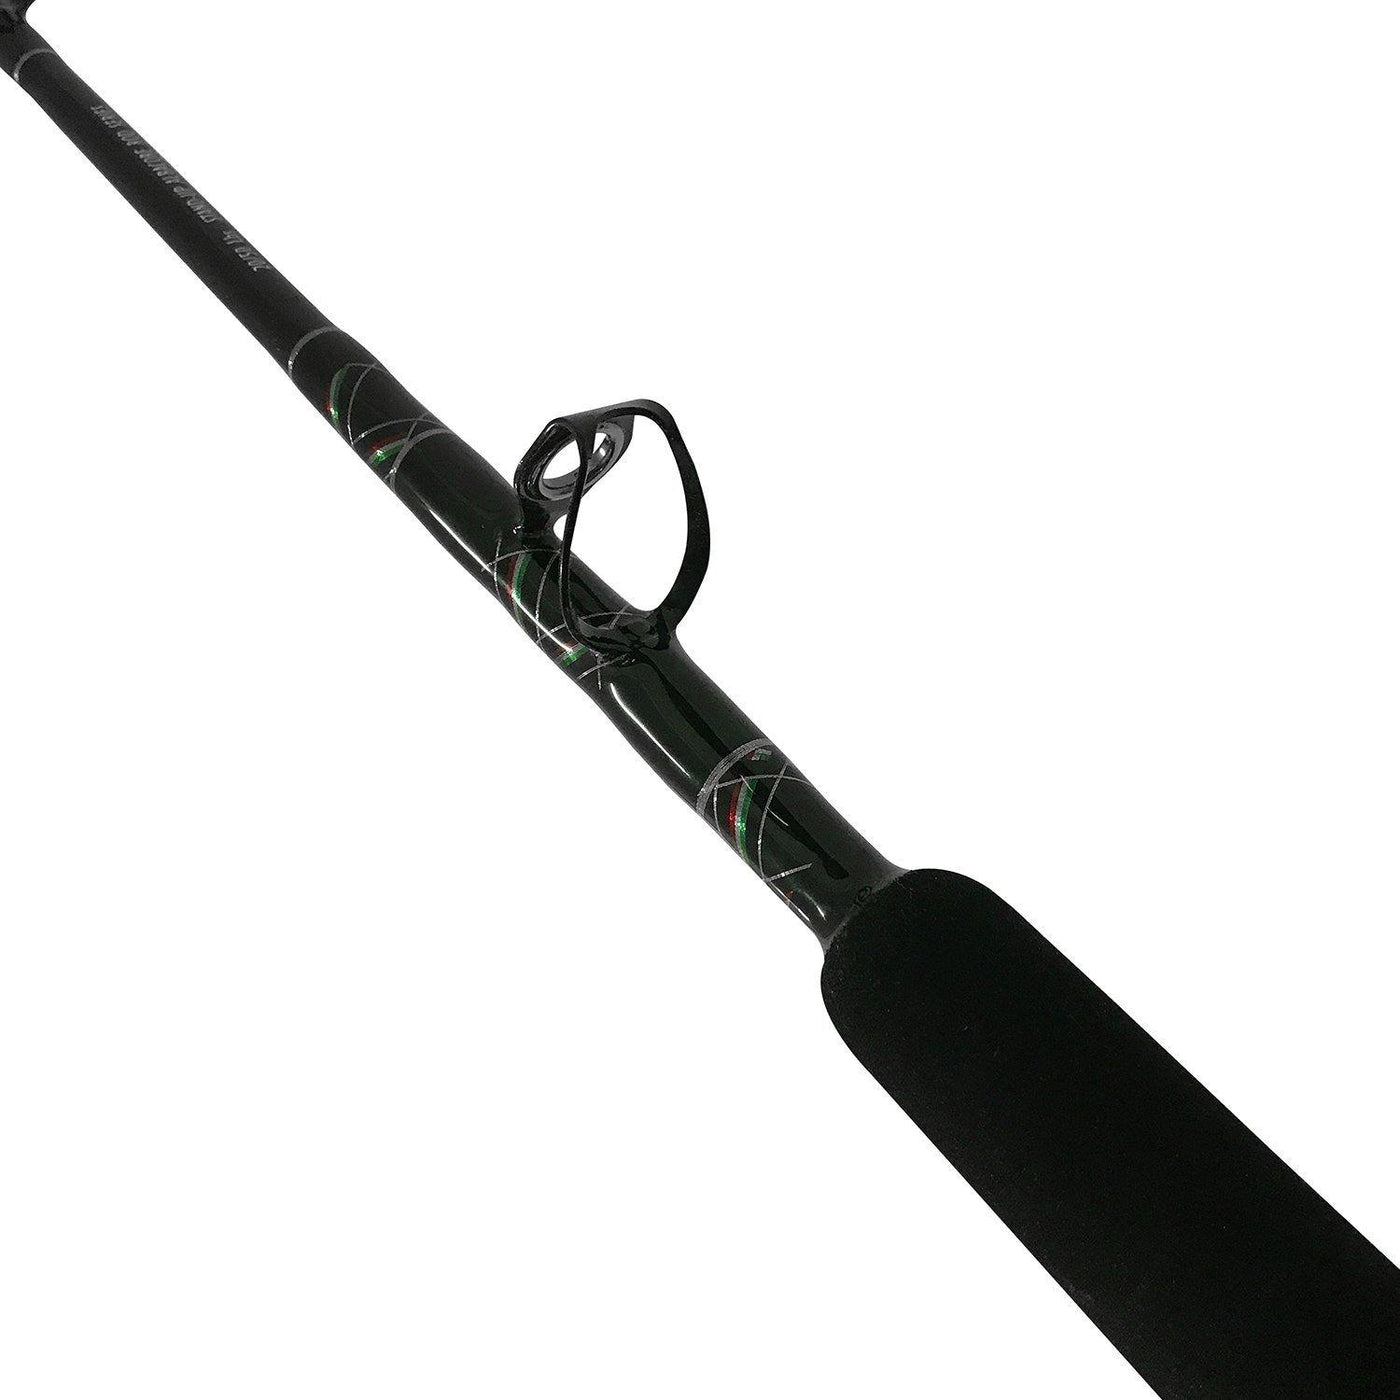 Stand-up fishing rods, Albacore series for anglers - Alutecnos